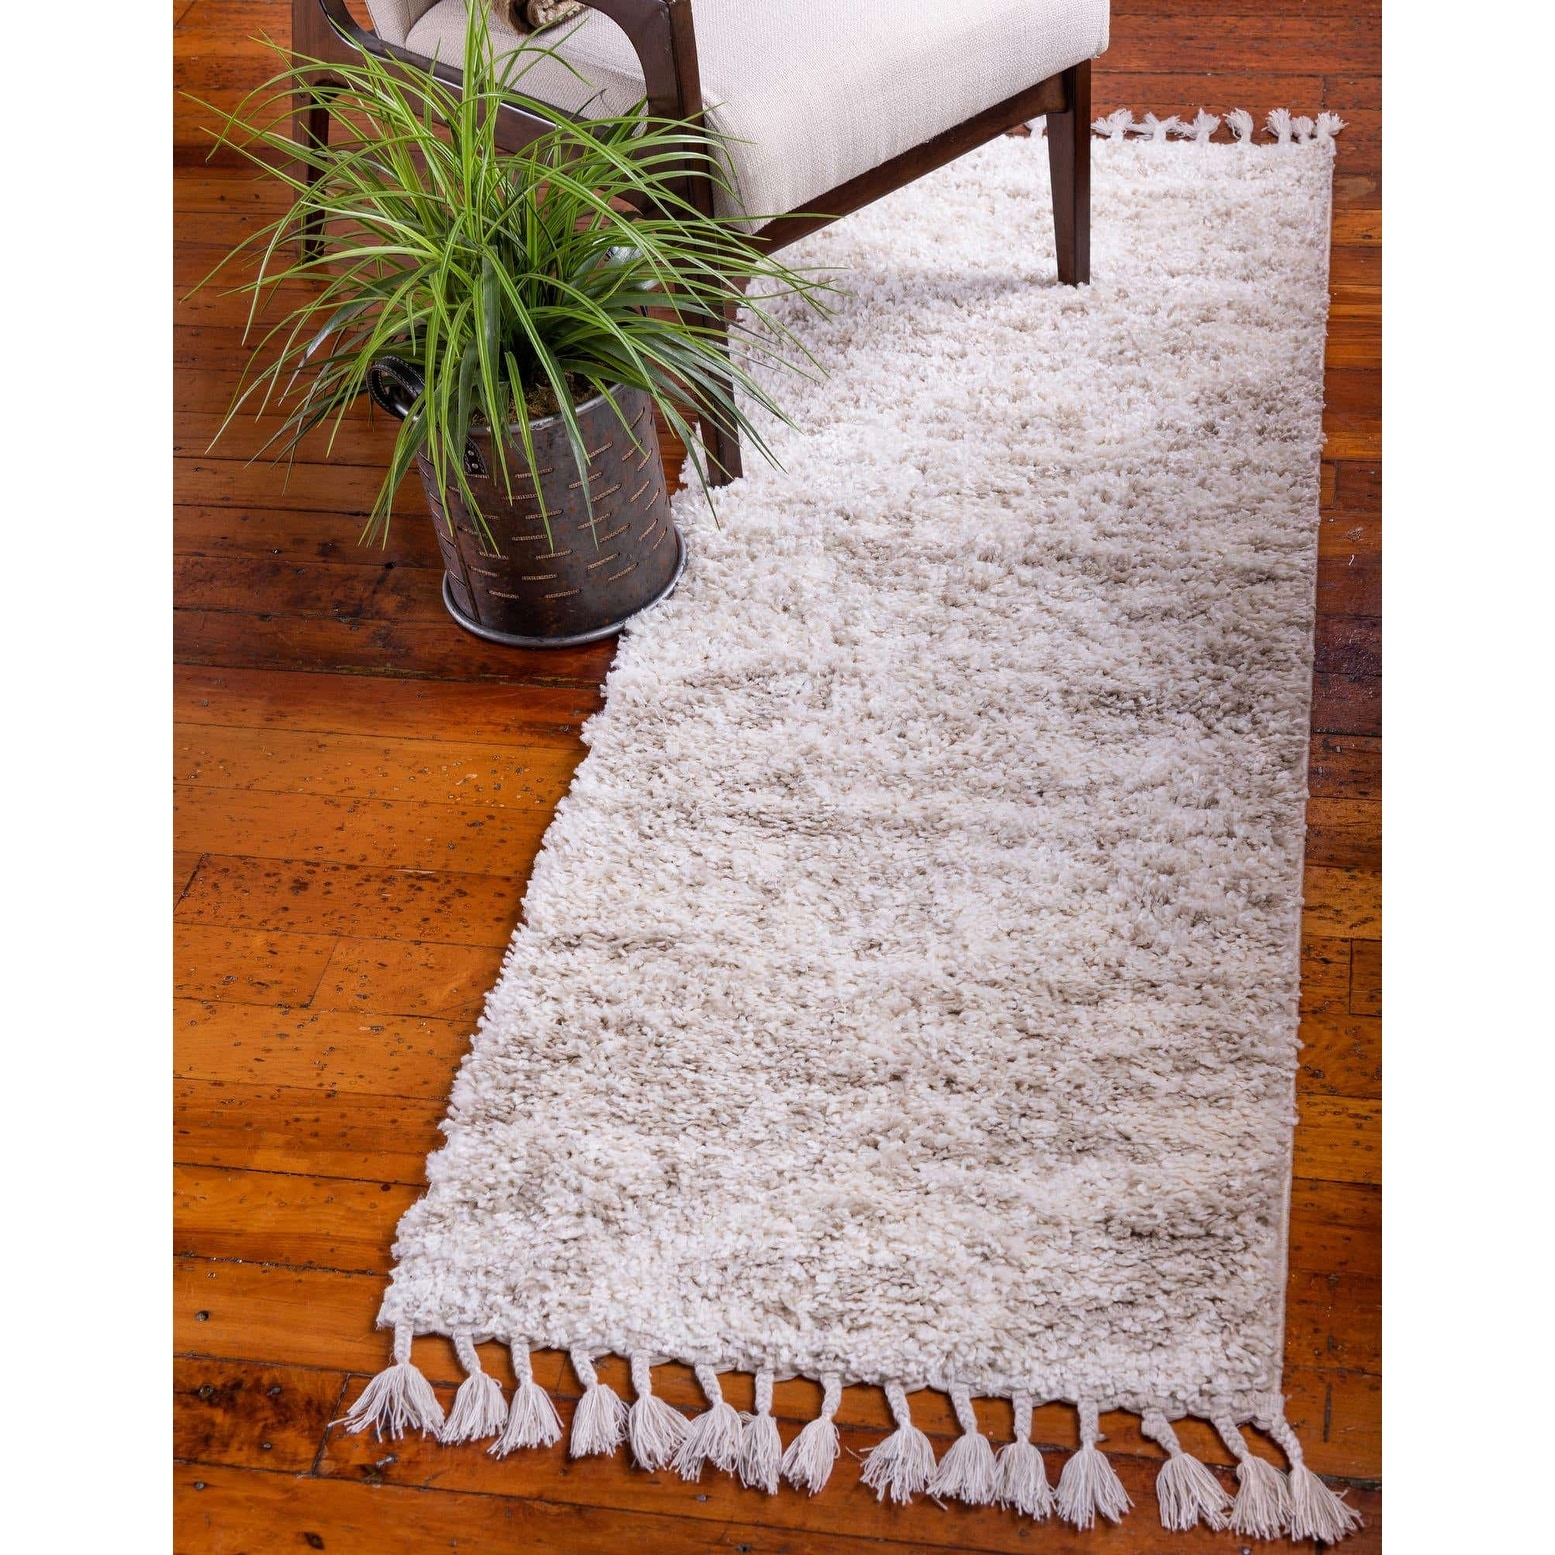 Plush & Cozy Area Rug Unique Loom Hygge Shag Collection Modern Moroccan Inspired 5' 0 x 8' 0 Rectangular Ivory/Tan 